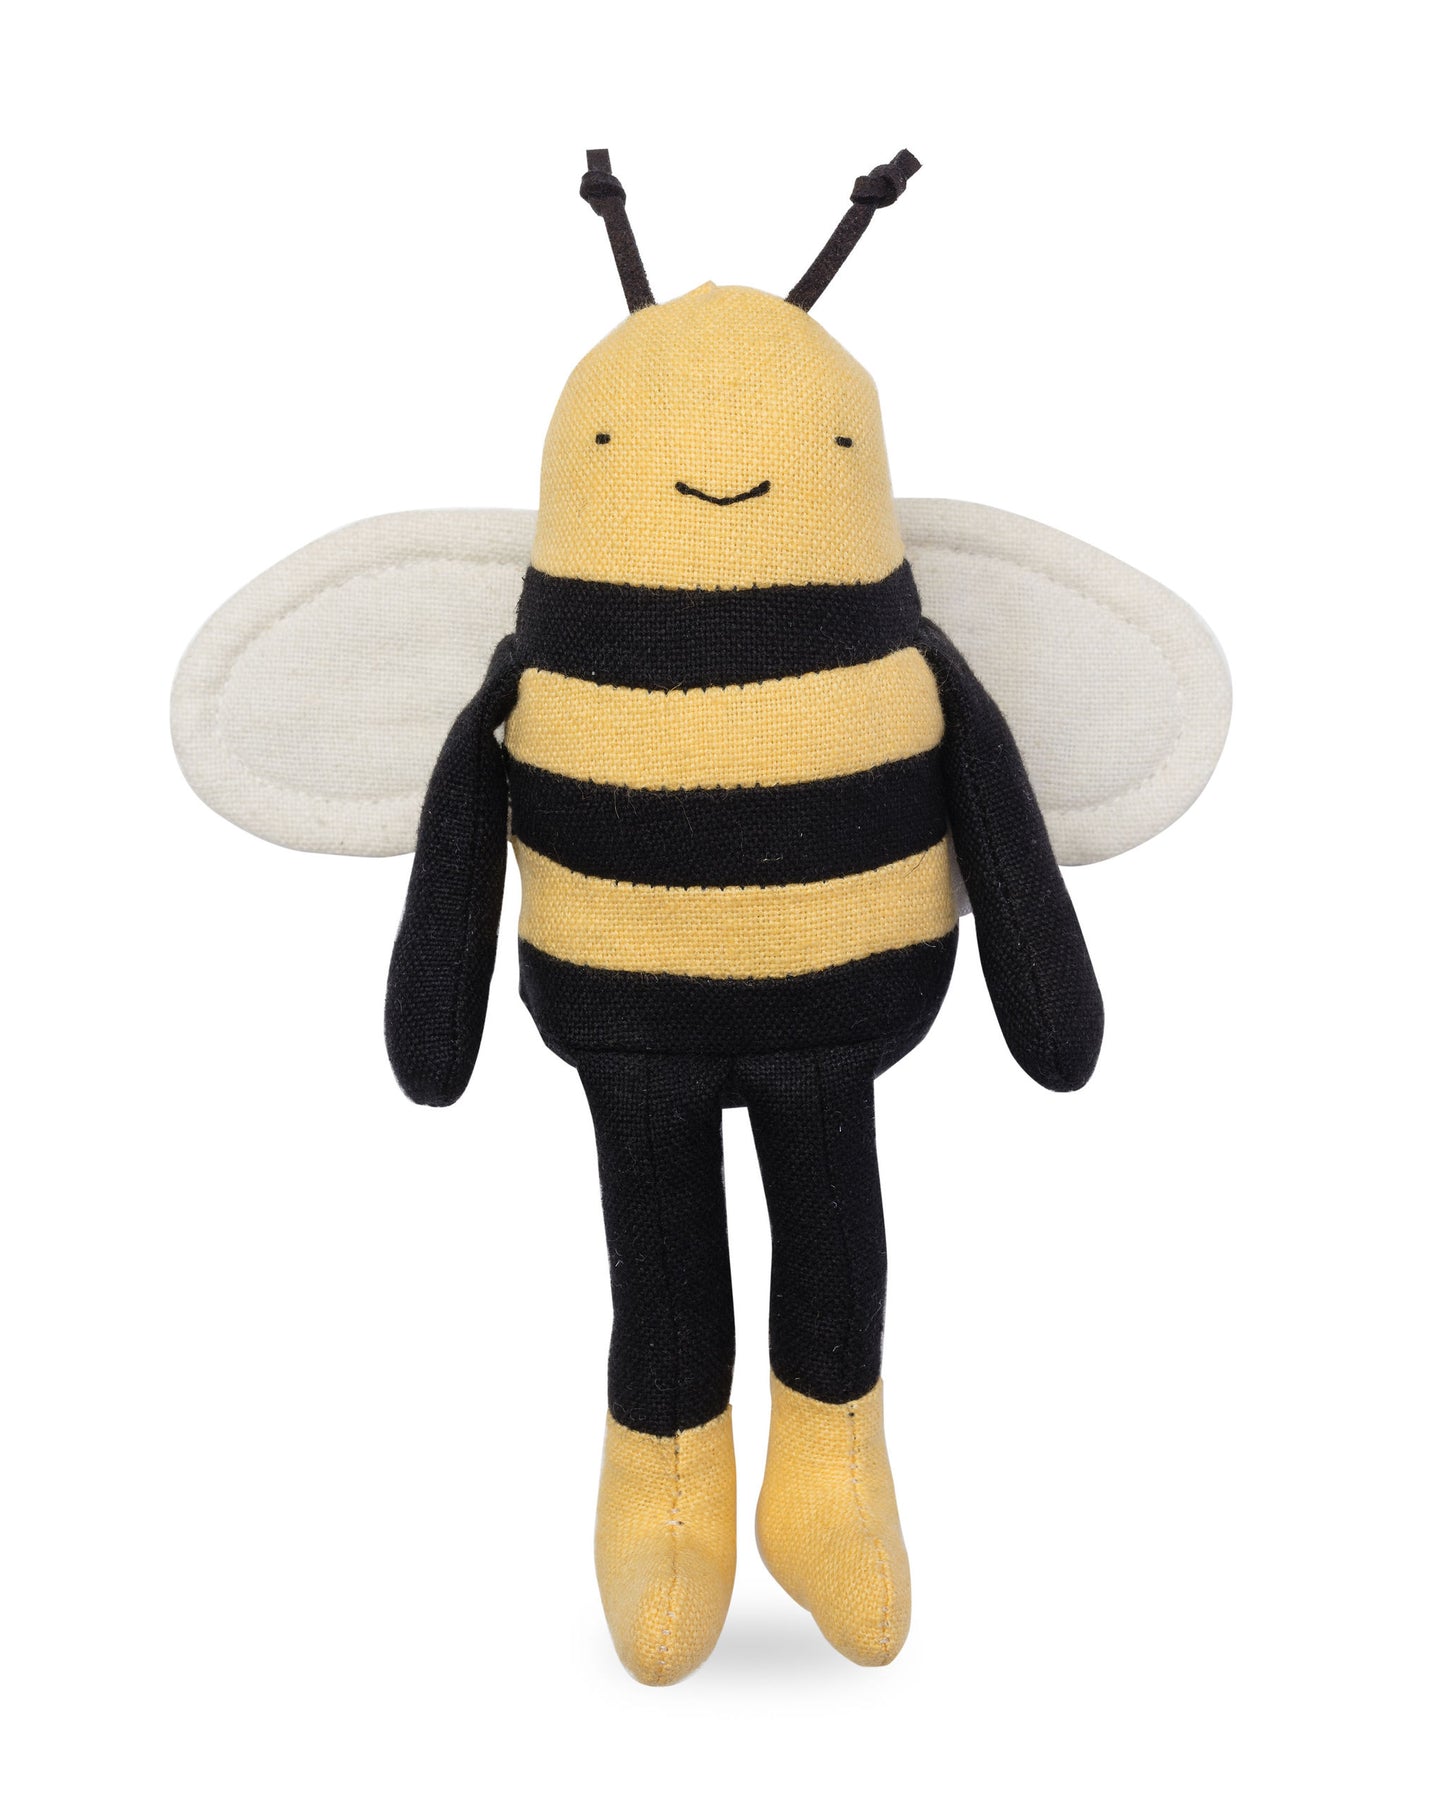 Mr Pickles - The Bumble Bees